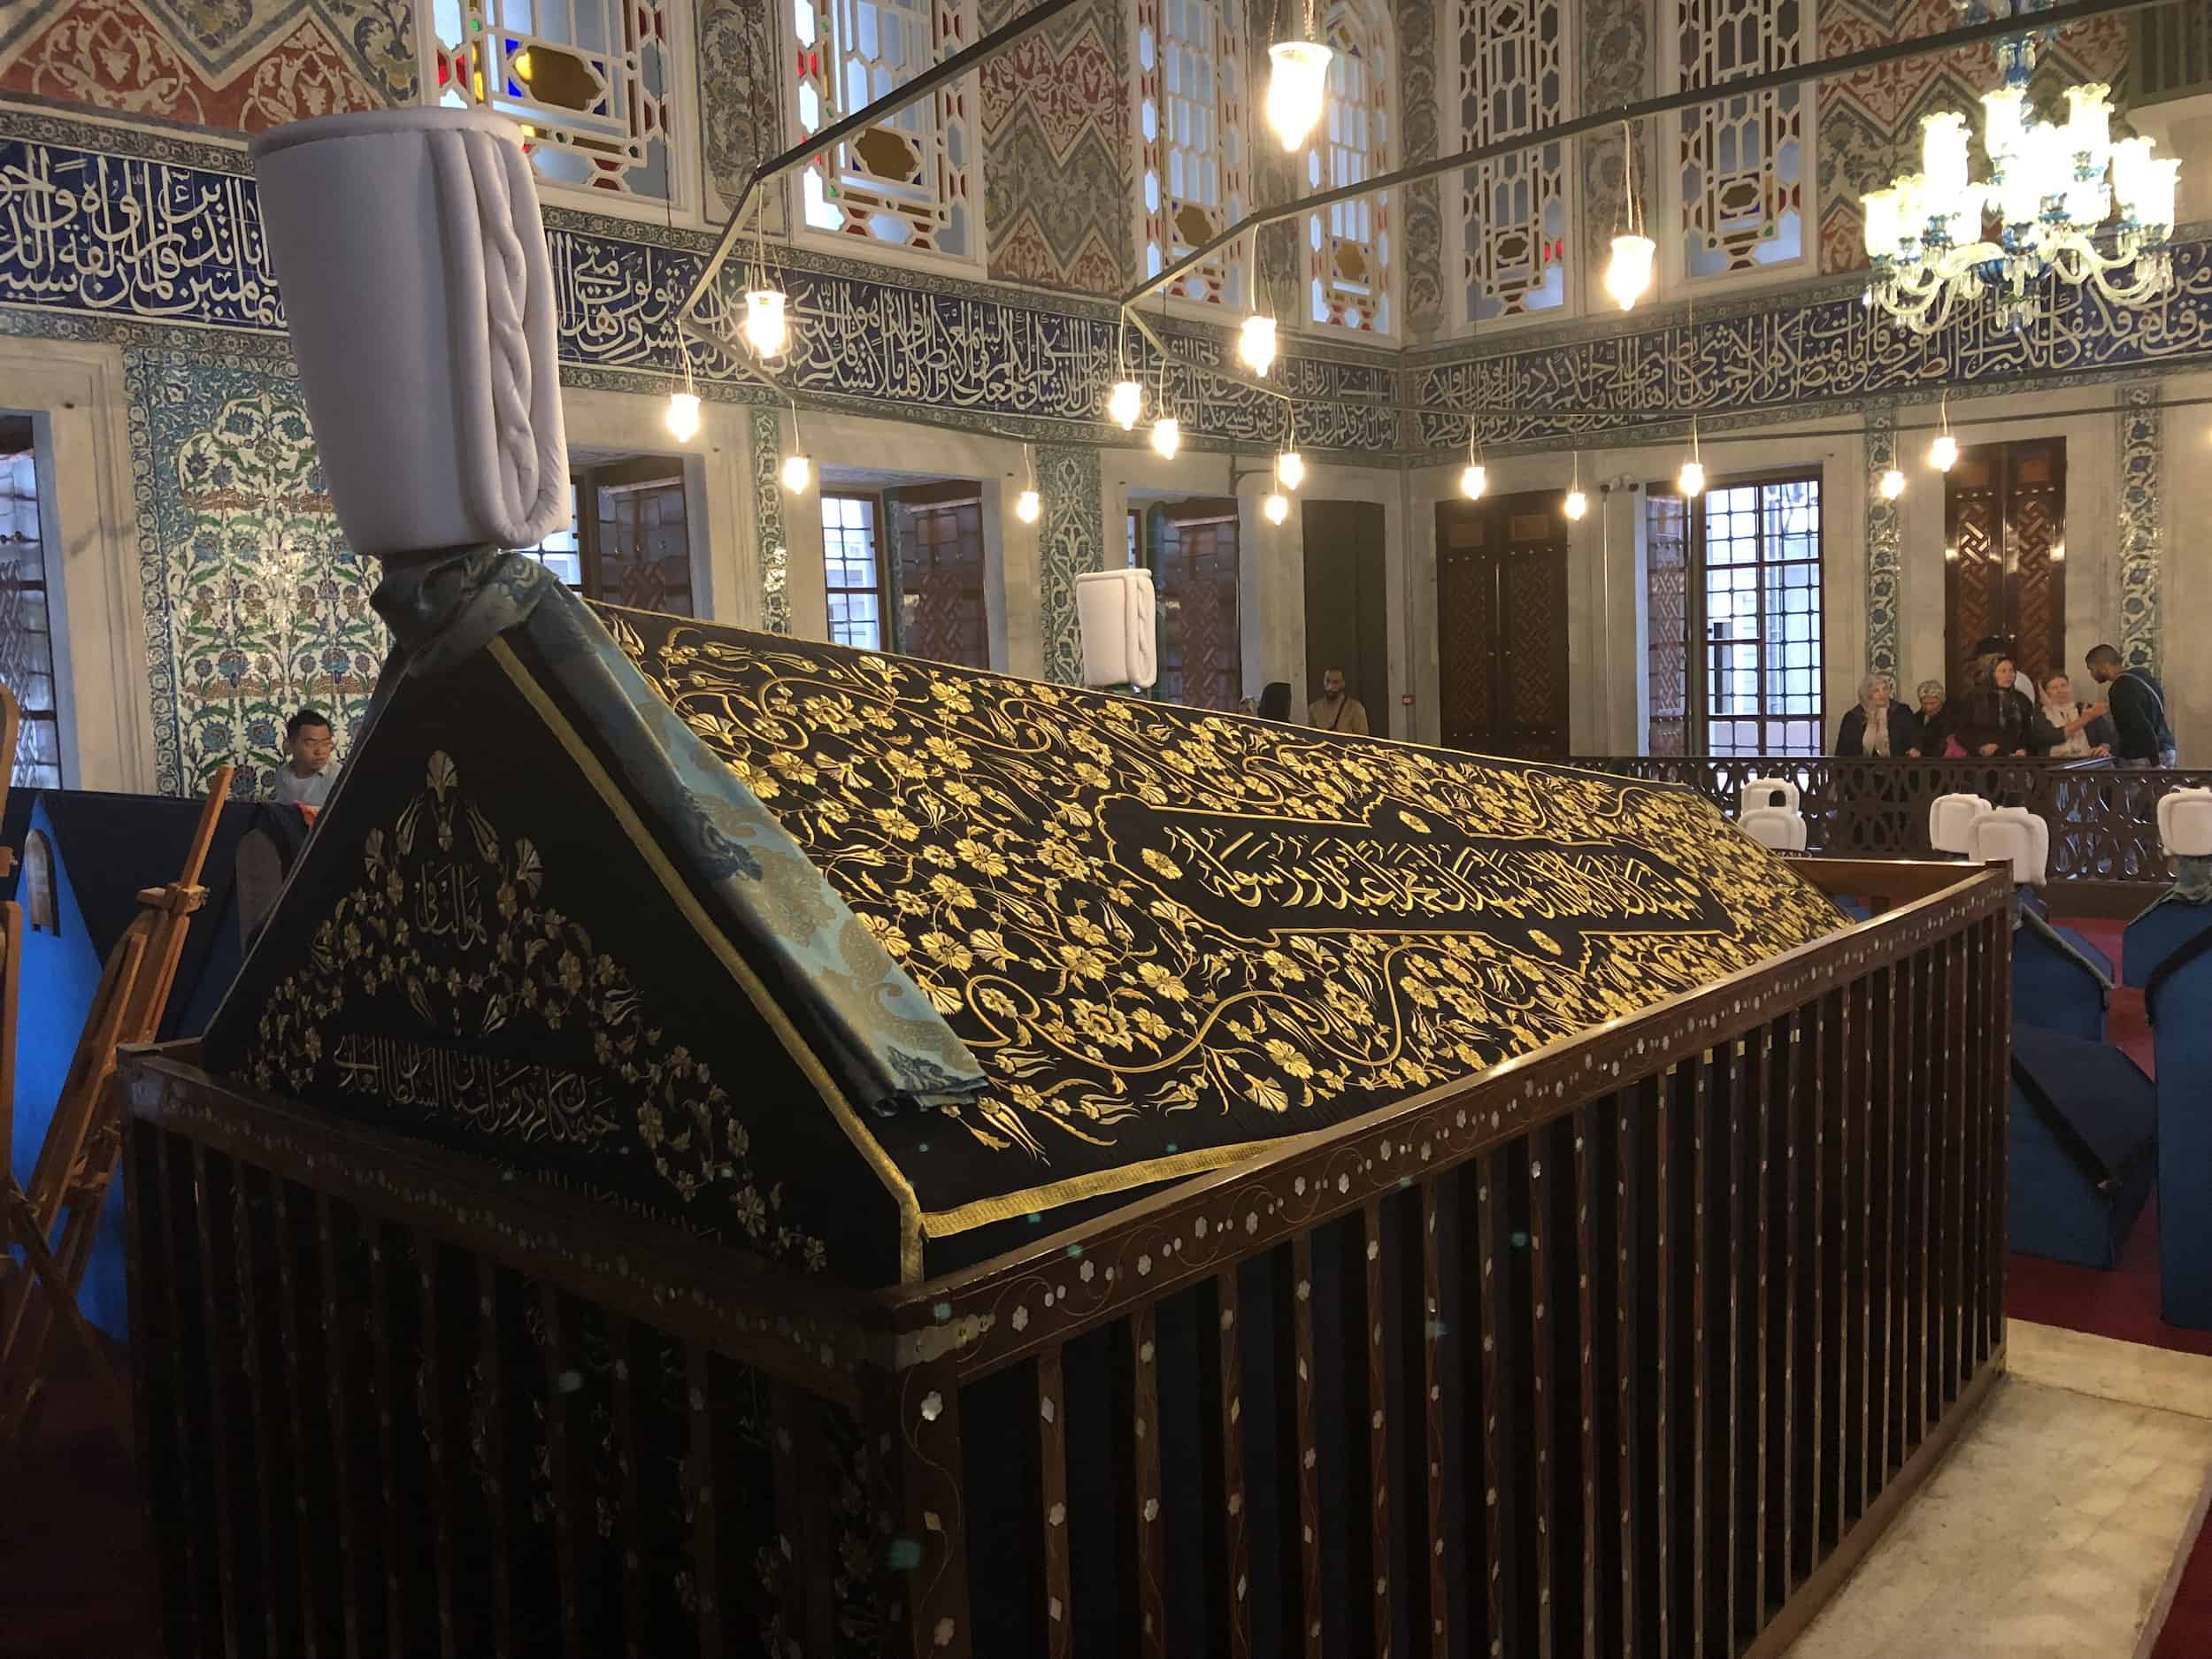 Sarcophagus of Ahmed I in October 2018 at the Tomb of Ahmed I